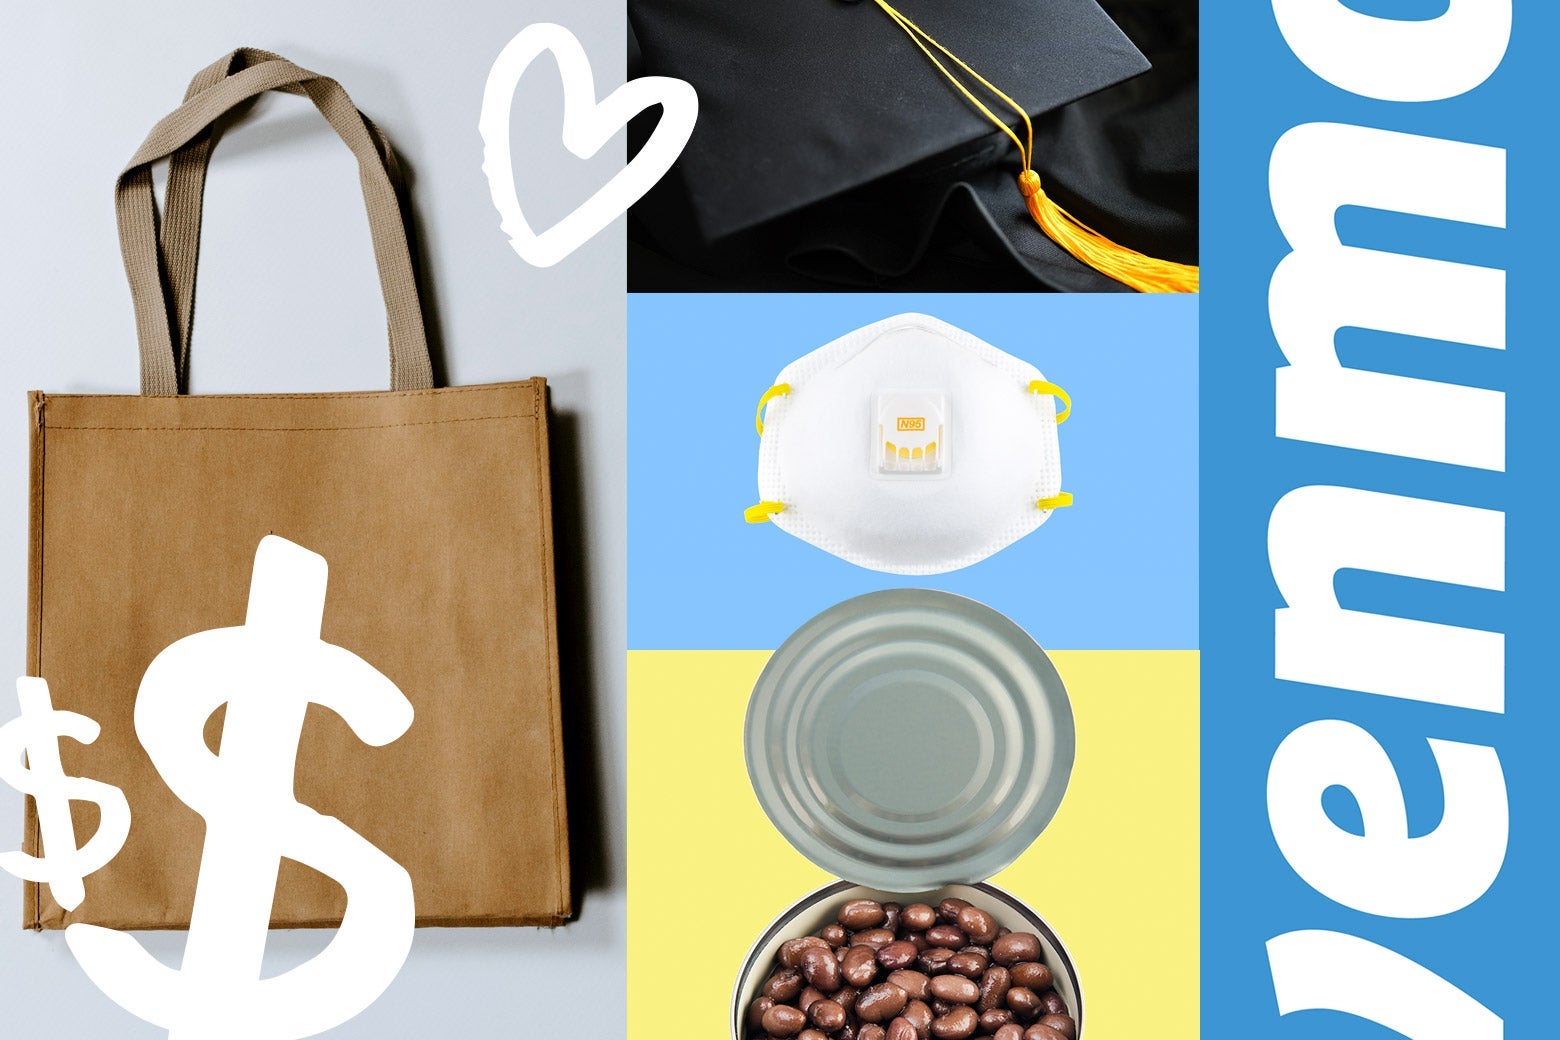 A collage depicting a tote bag, a graduation cap, an N95 mask, a can of beans and the Venmo logo.